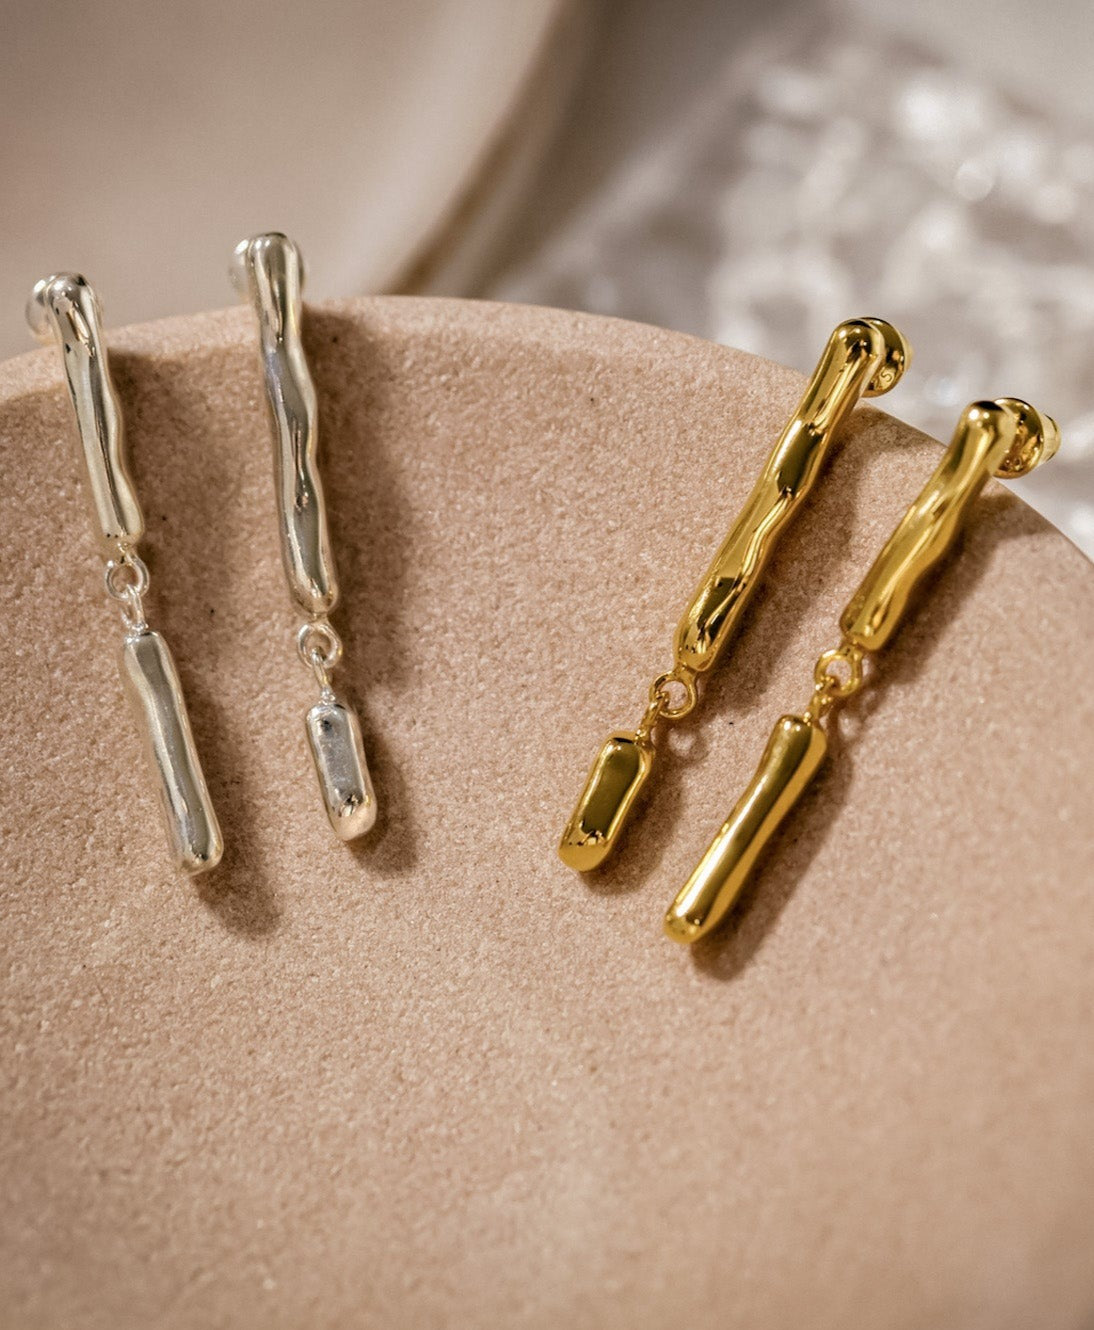 Kharys jewelry organic shaped hanging icicle earrings in 925 sterling silver and 18k gold vermeil